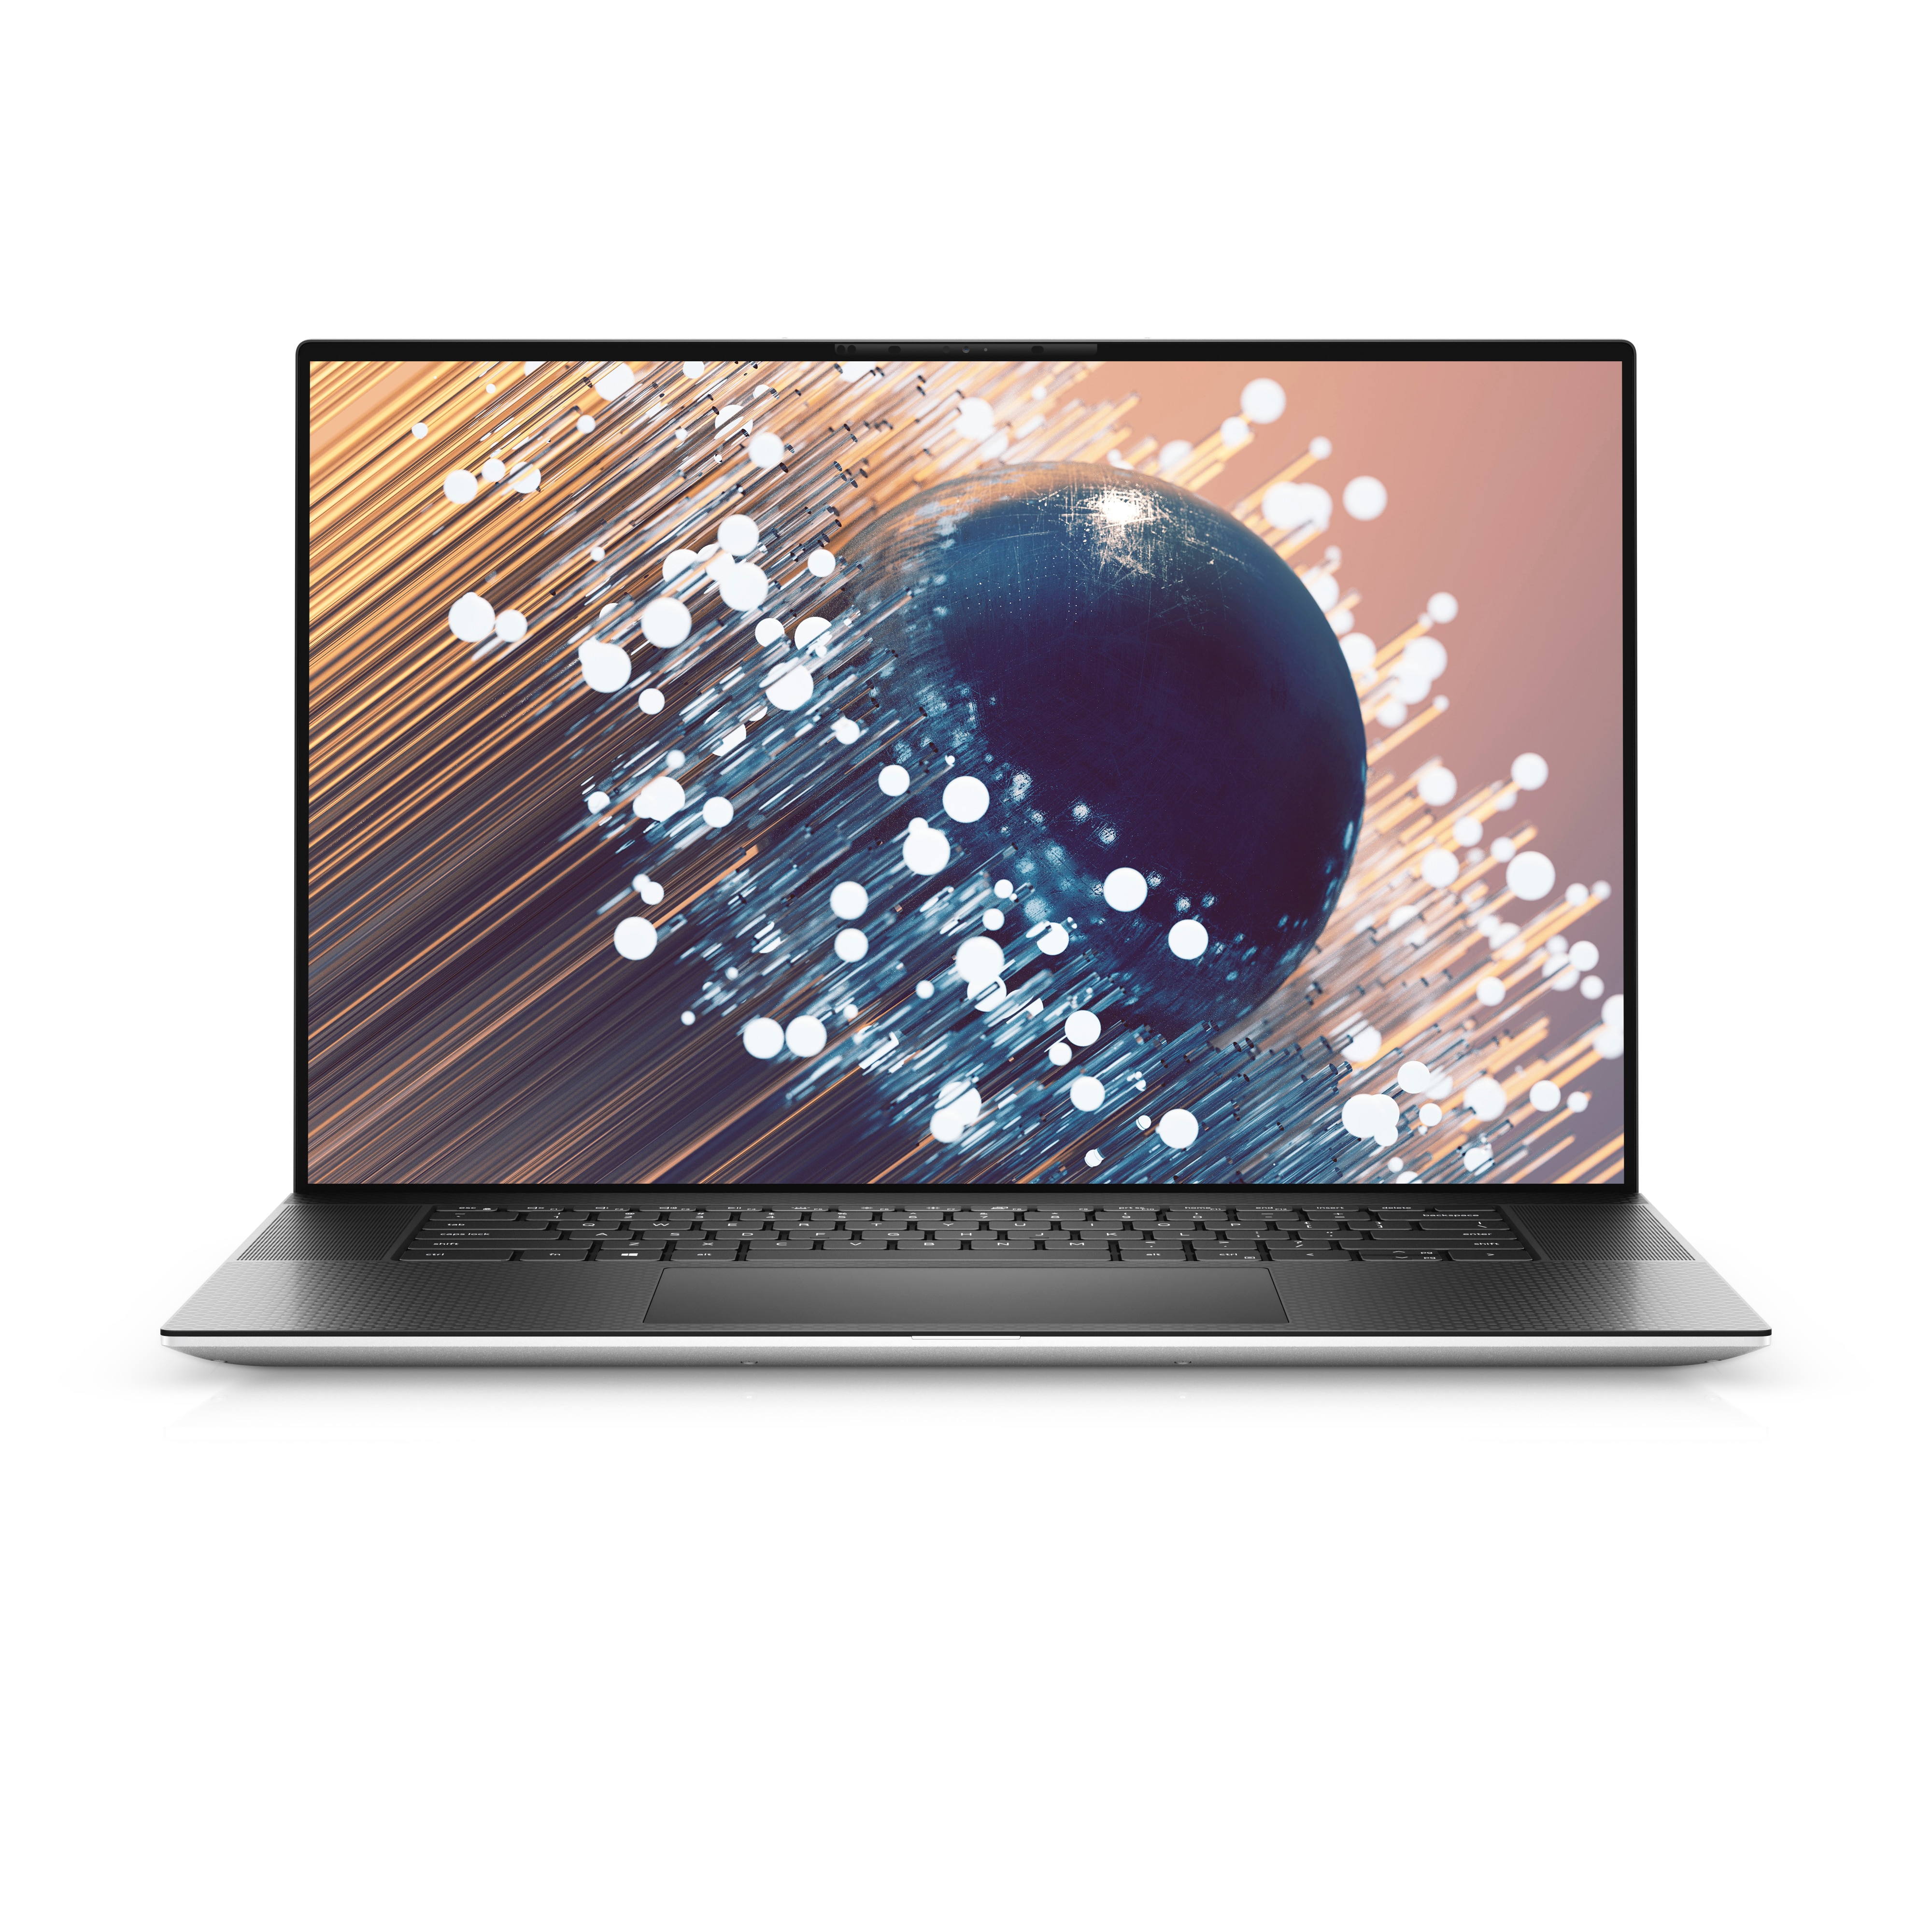 Dell XPS 17 (9700) Laptop | Dell India